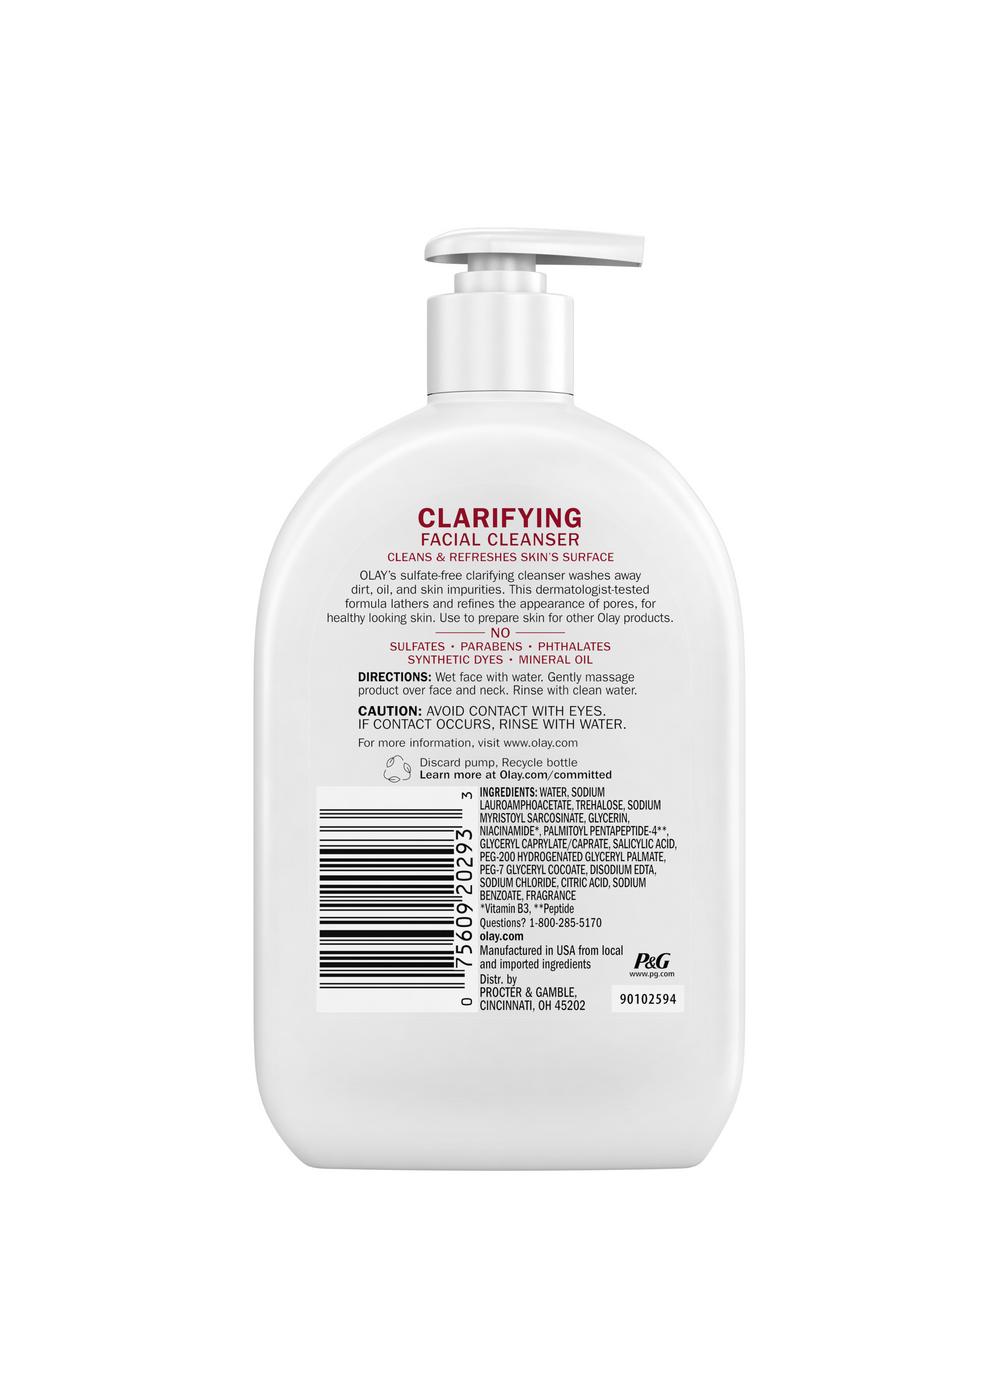 Olay Niacinamide + Peptide 24 Clarifying Daily Facial Cleanser; image 2 of 2